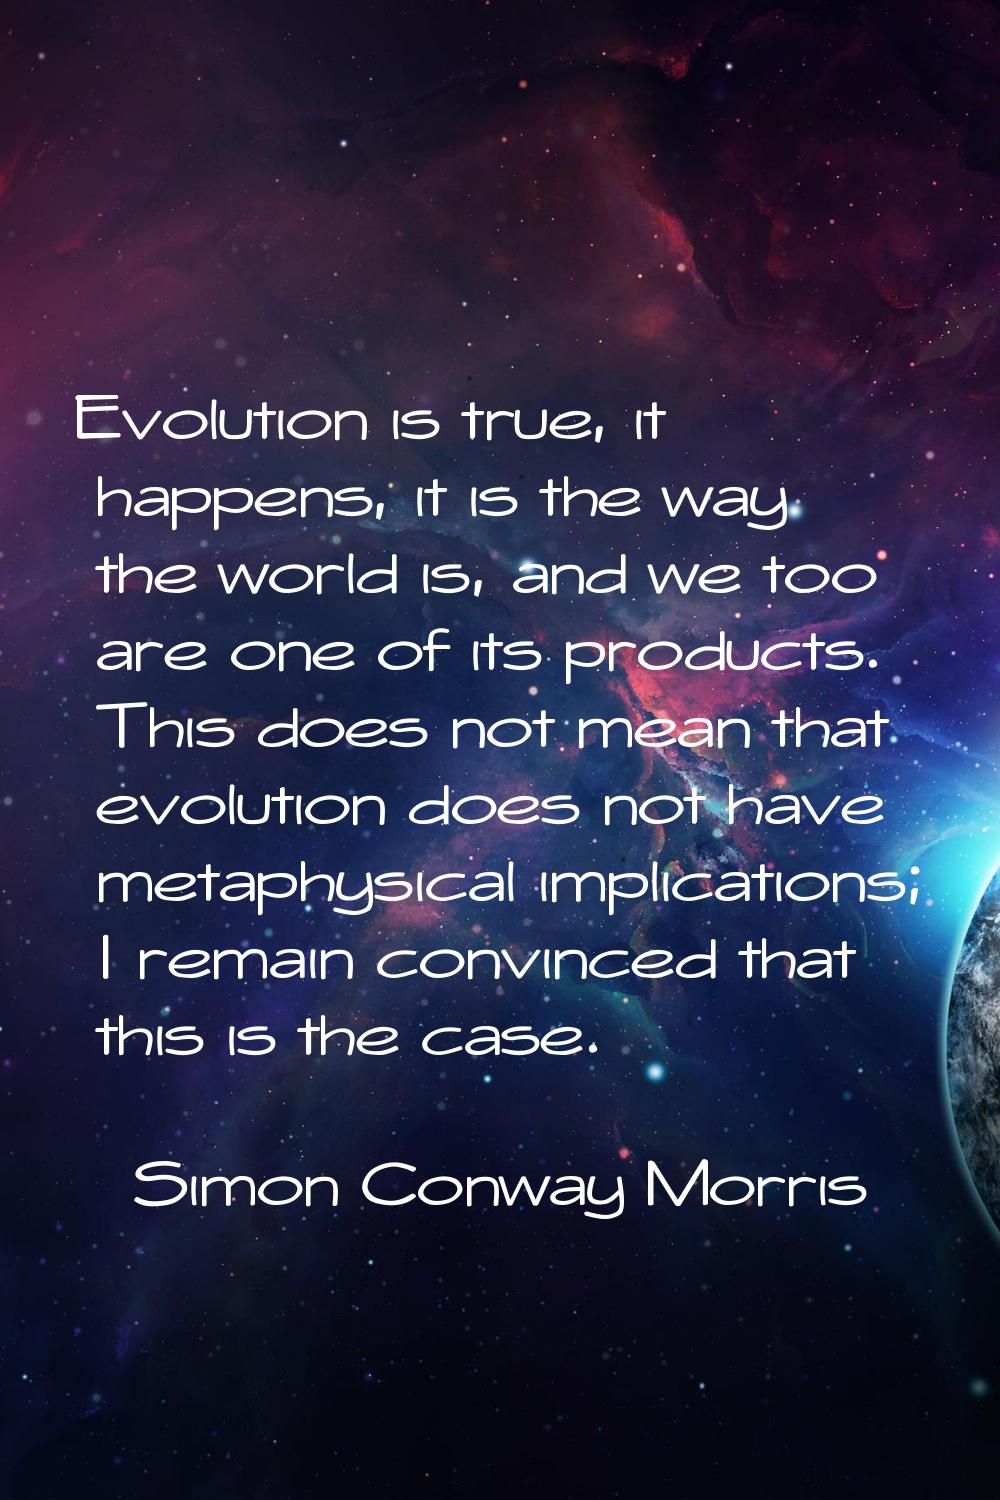 Evolution is true, it happens, it is the way the world is, and we too are one of its products. This